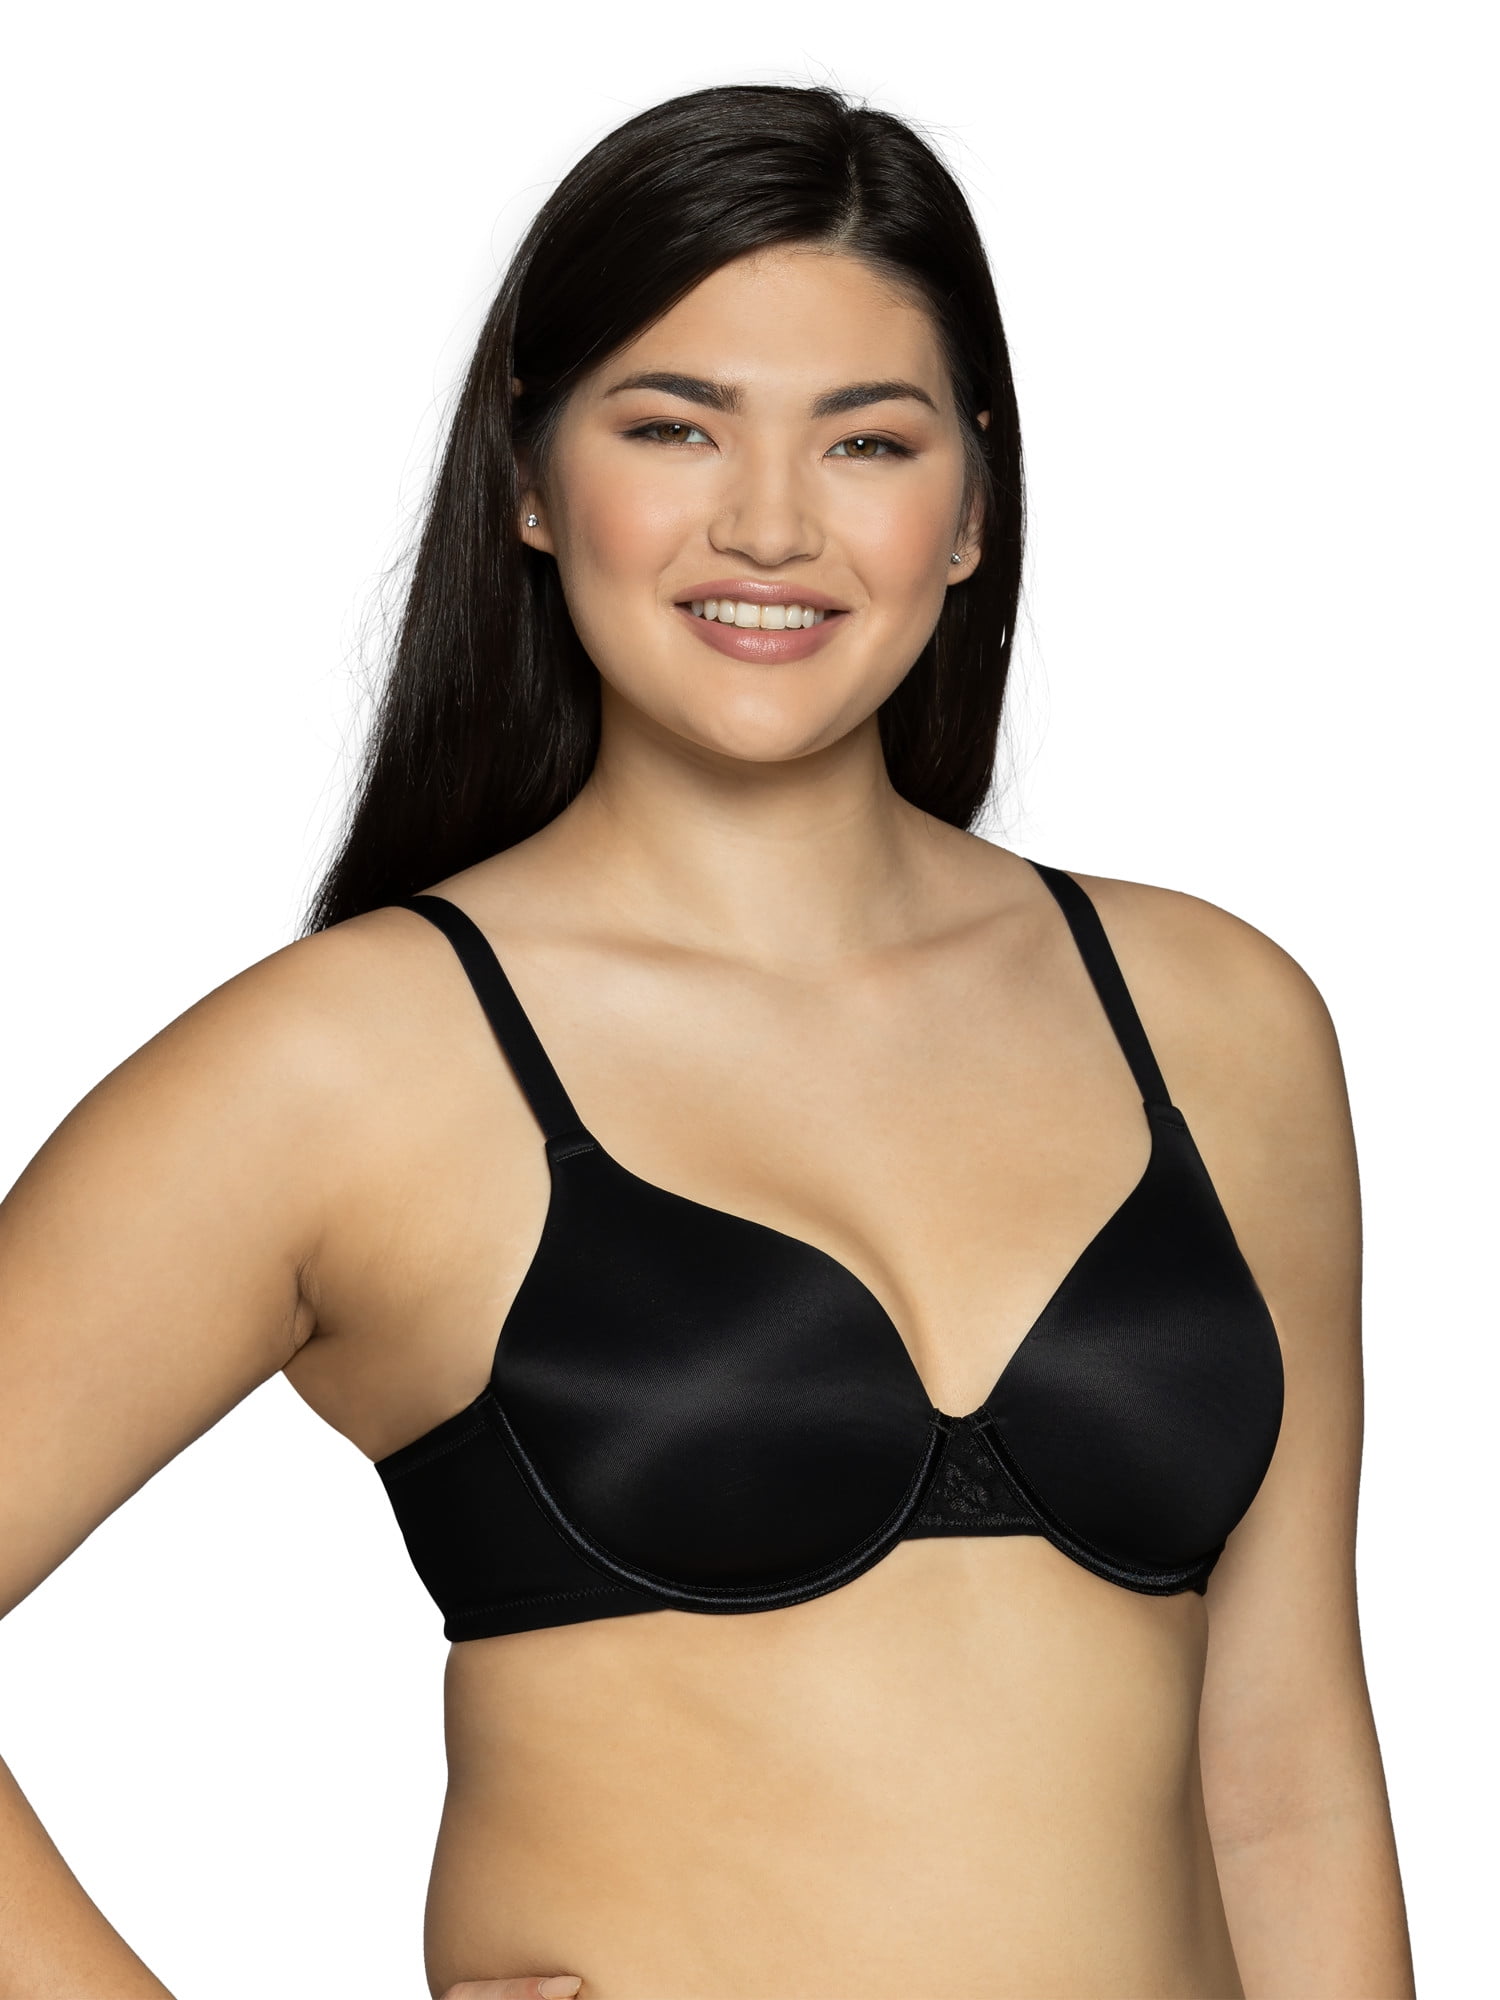 VANITY FAIR 76571 Radiant Smooth Bra Unlined Underwire Womens 38C Black NEW  NWT $22.95 - PicClick